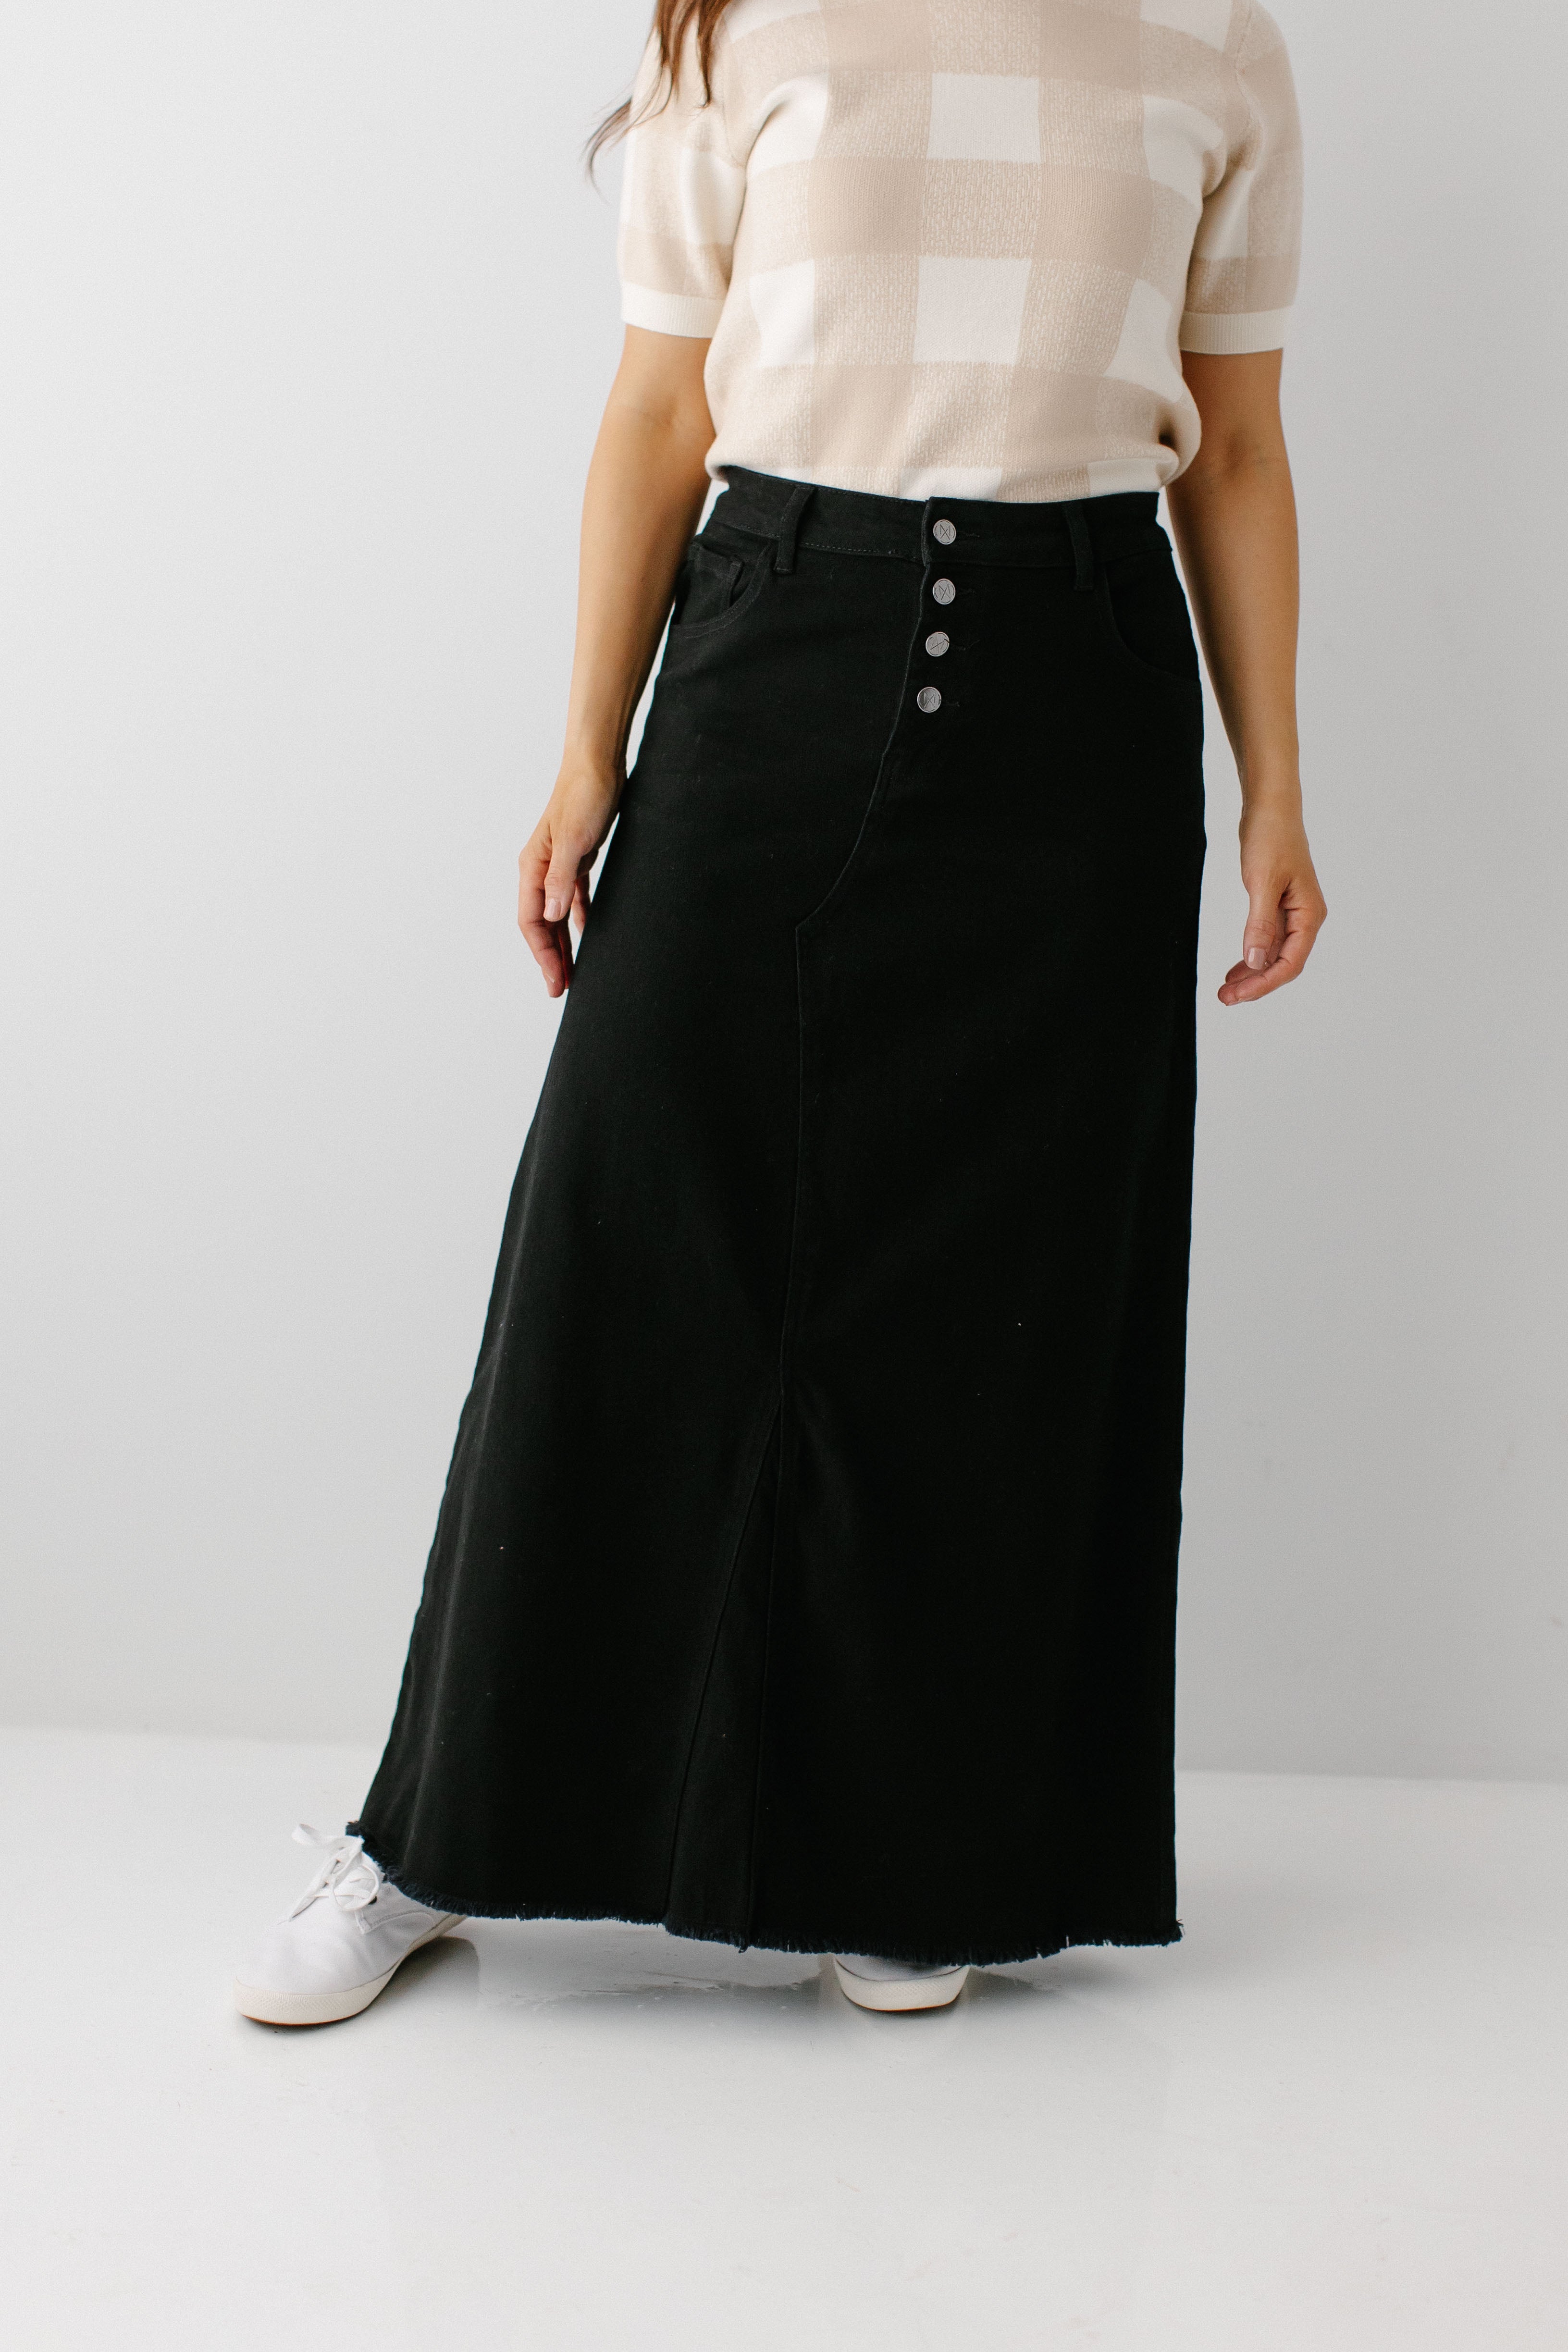 Why Should I Love the Long Denim Skirt? | Dungarees Online